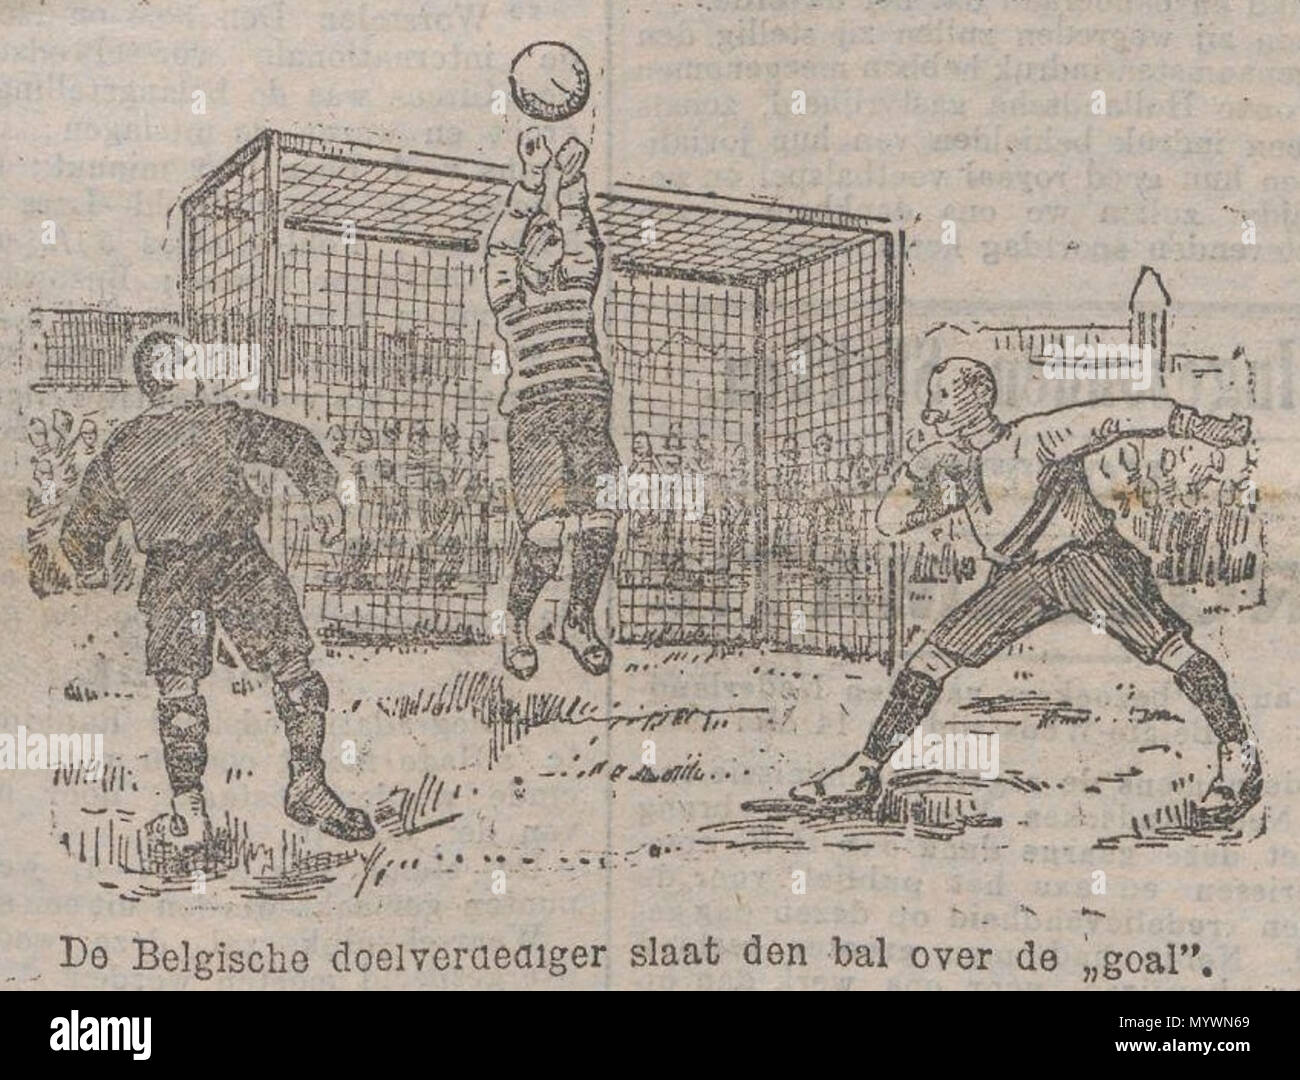 . English: Illustration of a match detail of the first Rotterdamsch Nieuwsblad Beker at the Schuttersveld in Rotterdam on May 14, 1905, with the Belgian keeper making a save on the shot of a Dutch player (right)  . 22 May 2014, 17:24:24. Unknown cartoonist of newspaper Rotterdamsch Nieuwsblad 4 Netherlands v Belgium (1905) Stock Photo